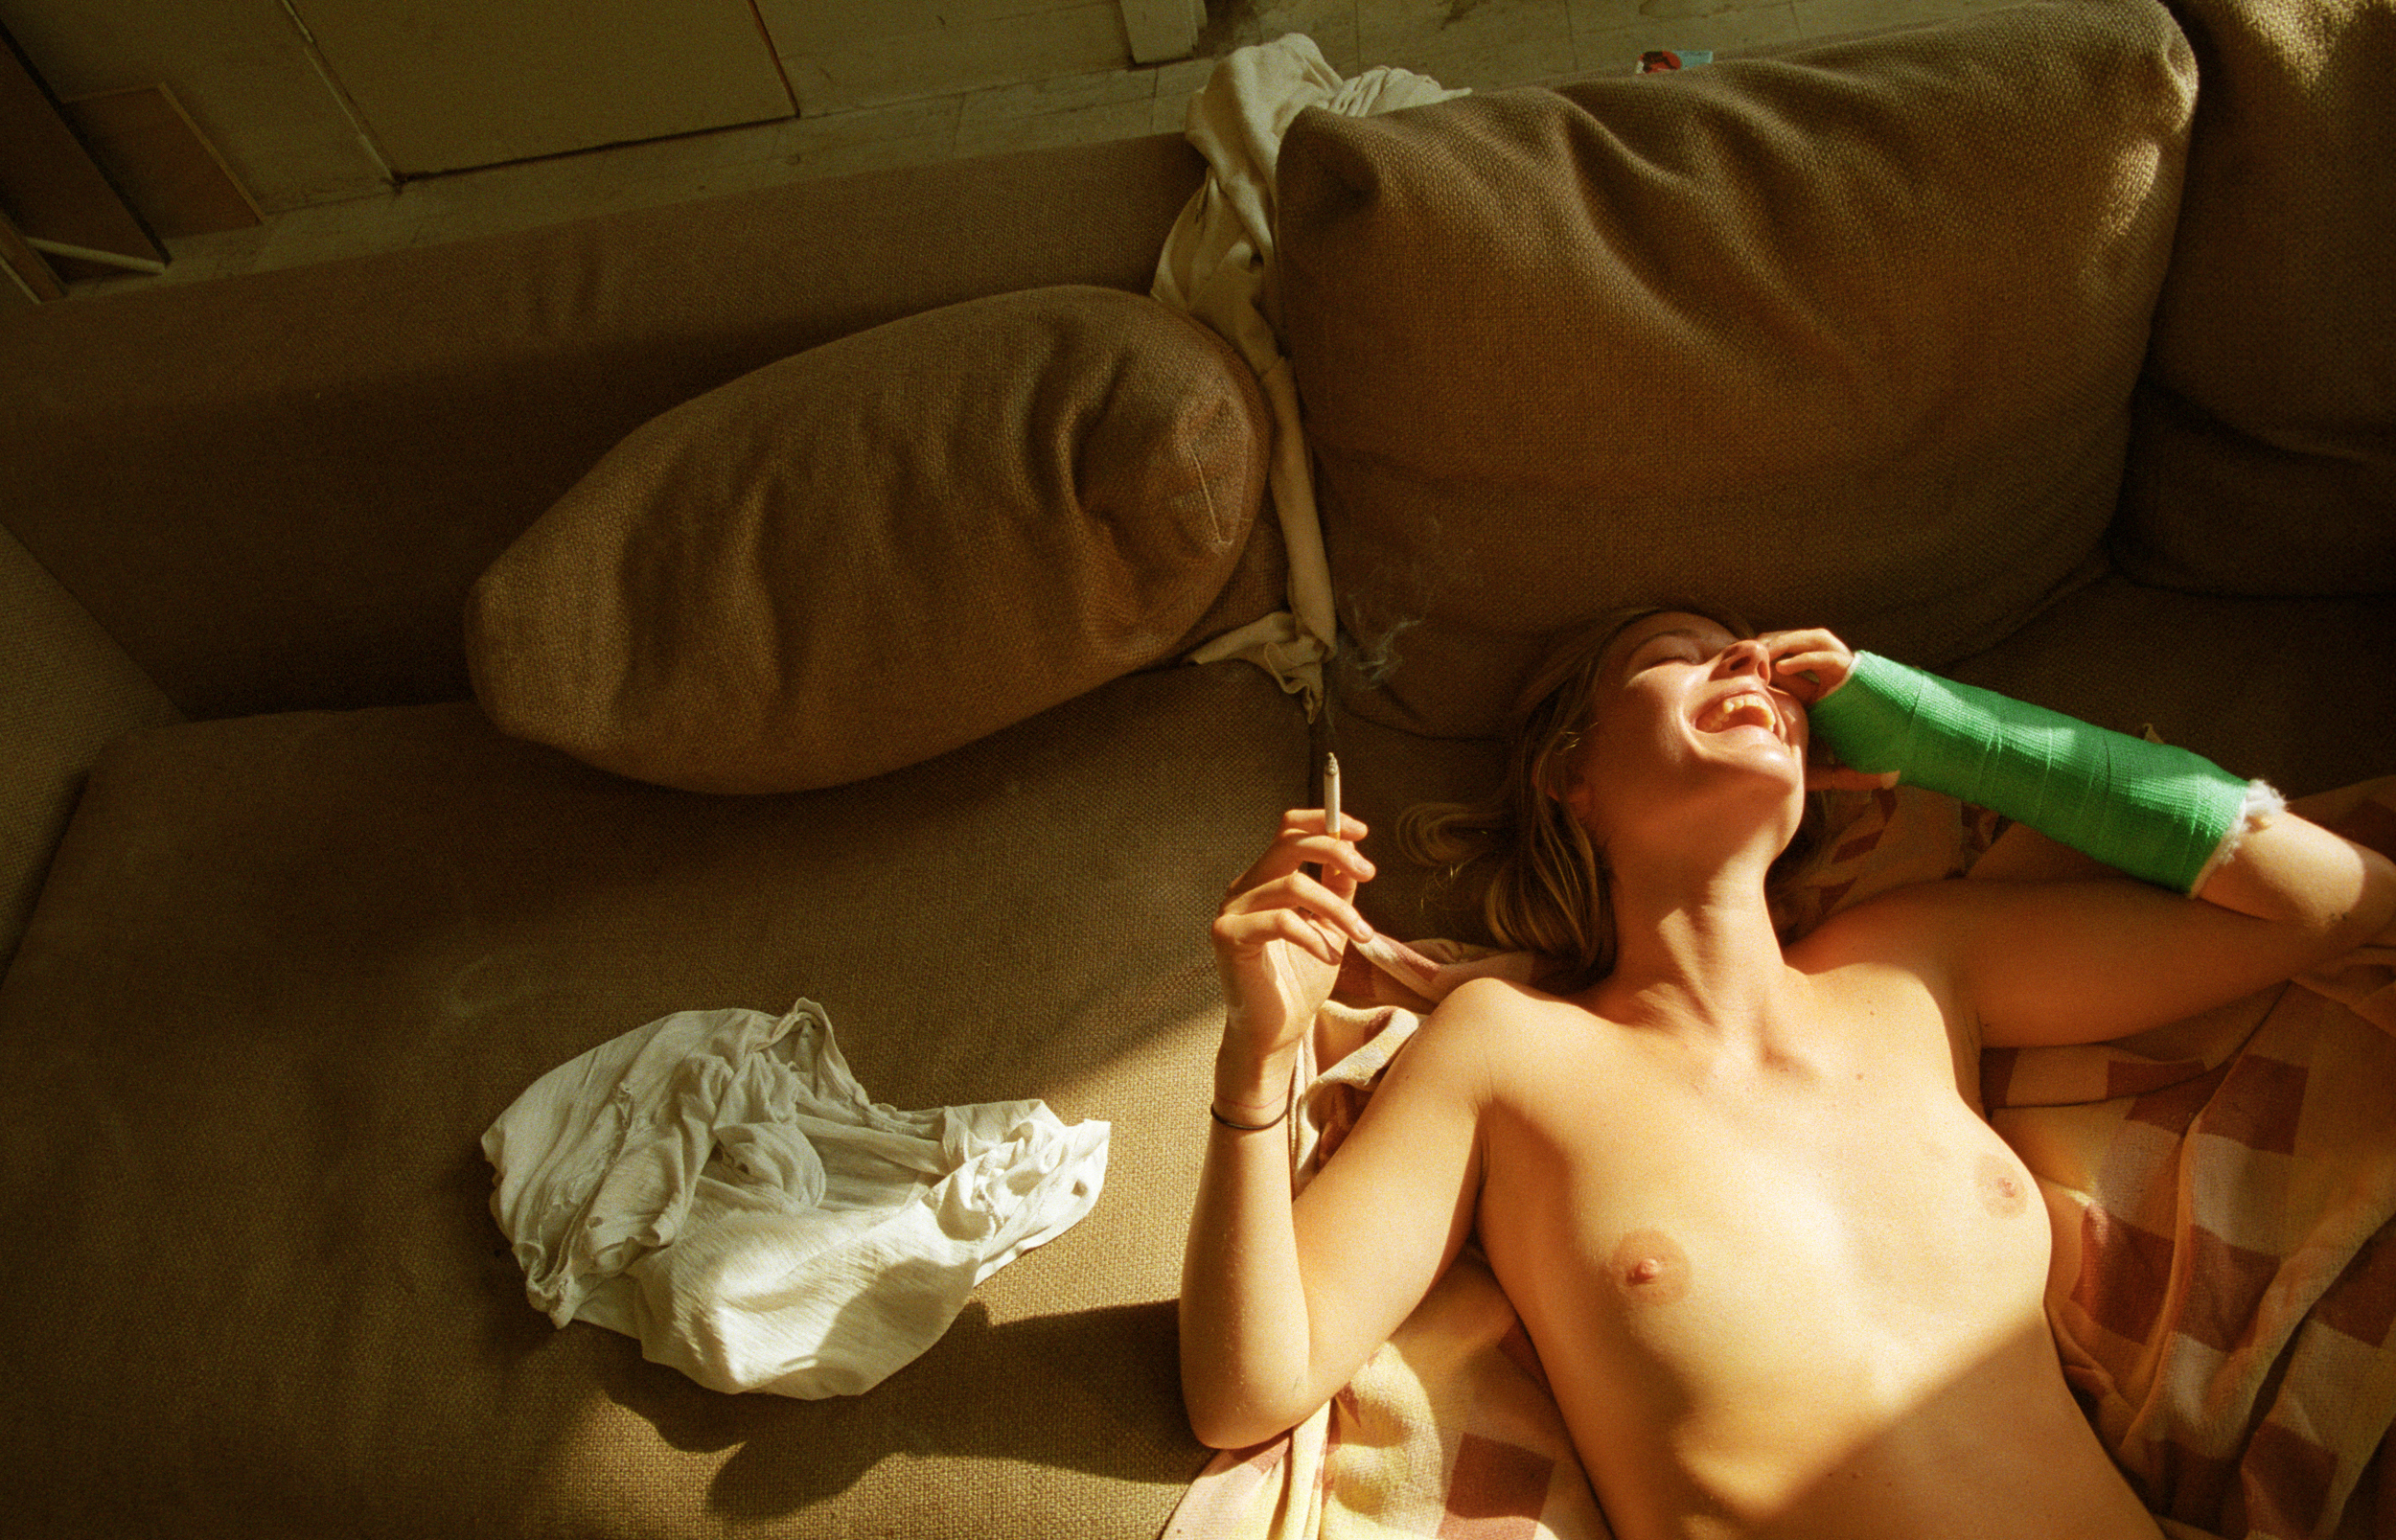 a person with a green cast on their arm laughs as they smoke a cigarette, laying topless on their sofa